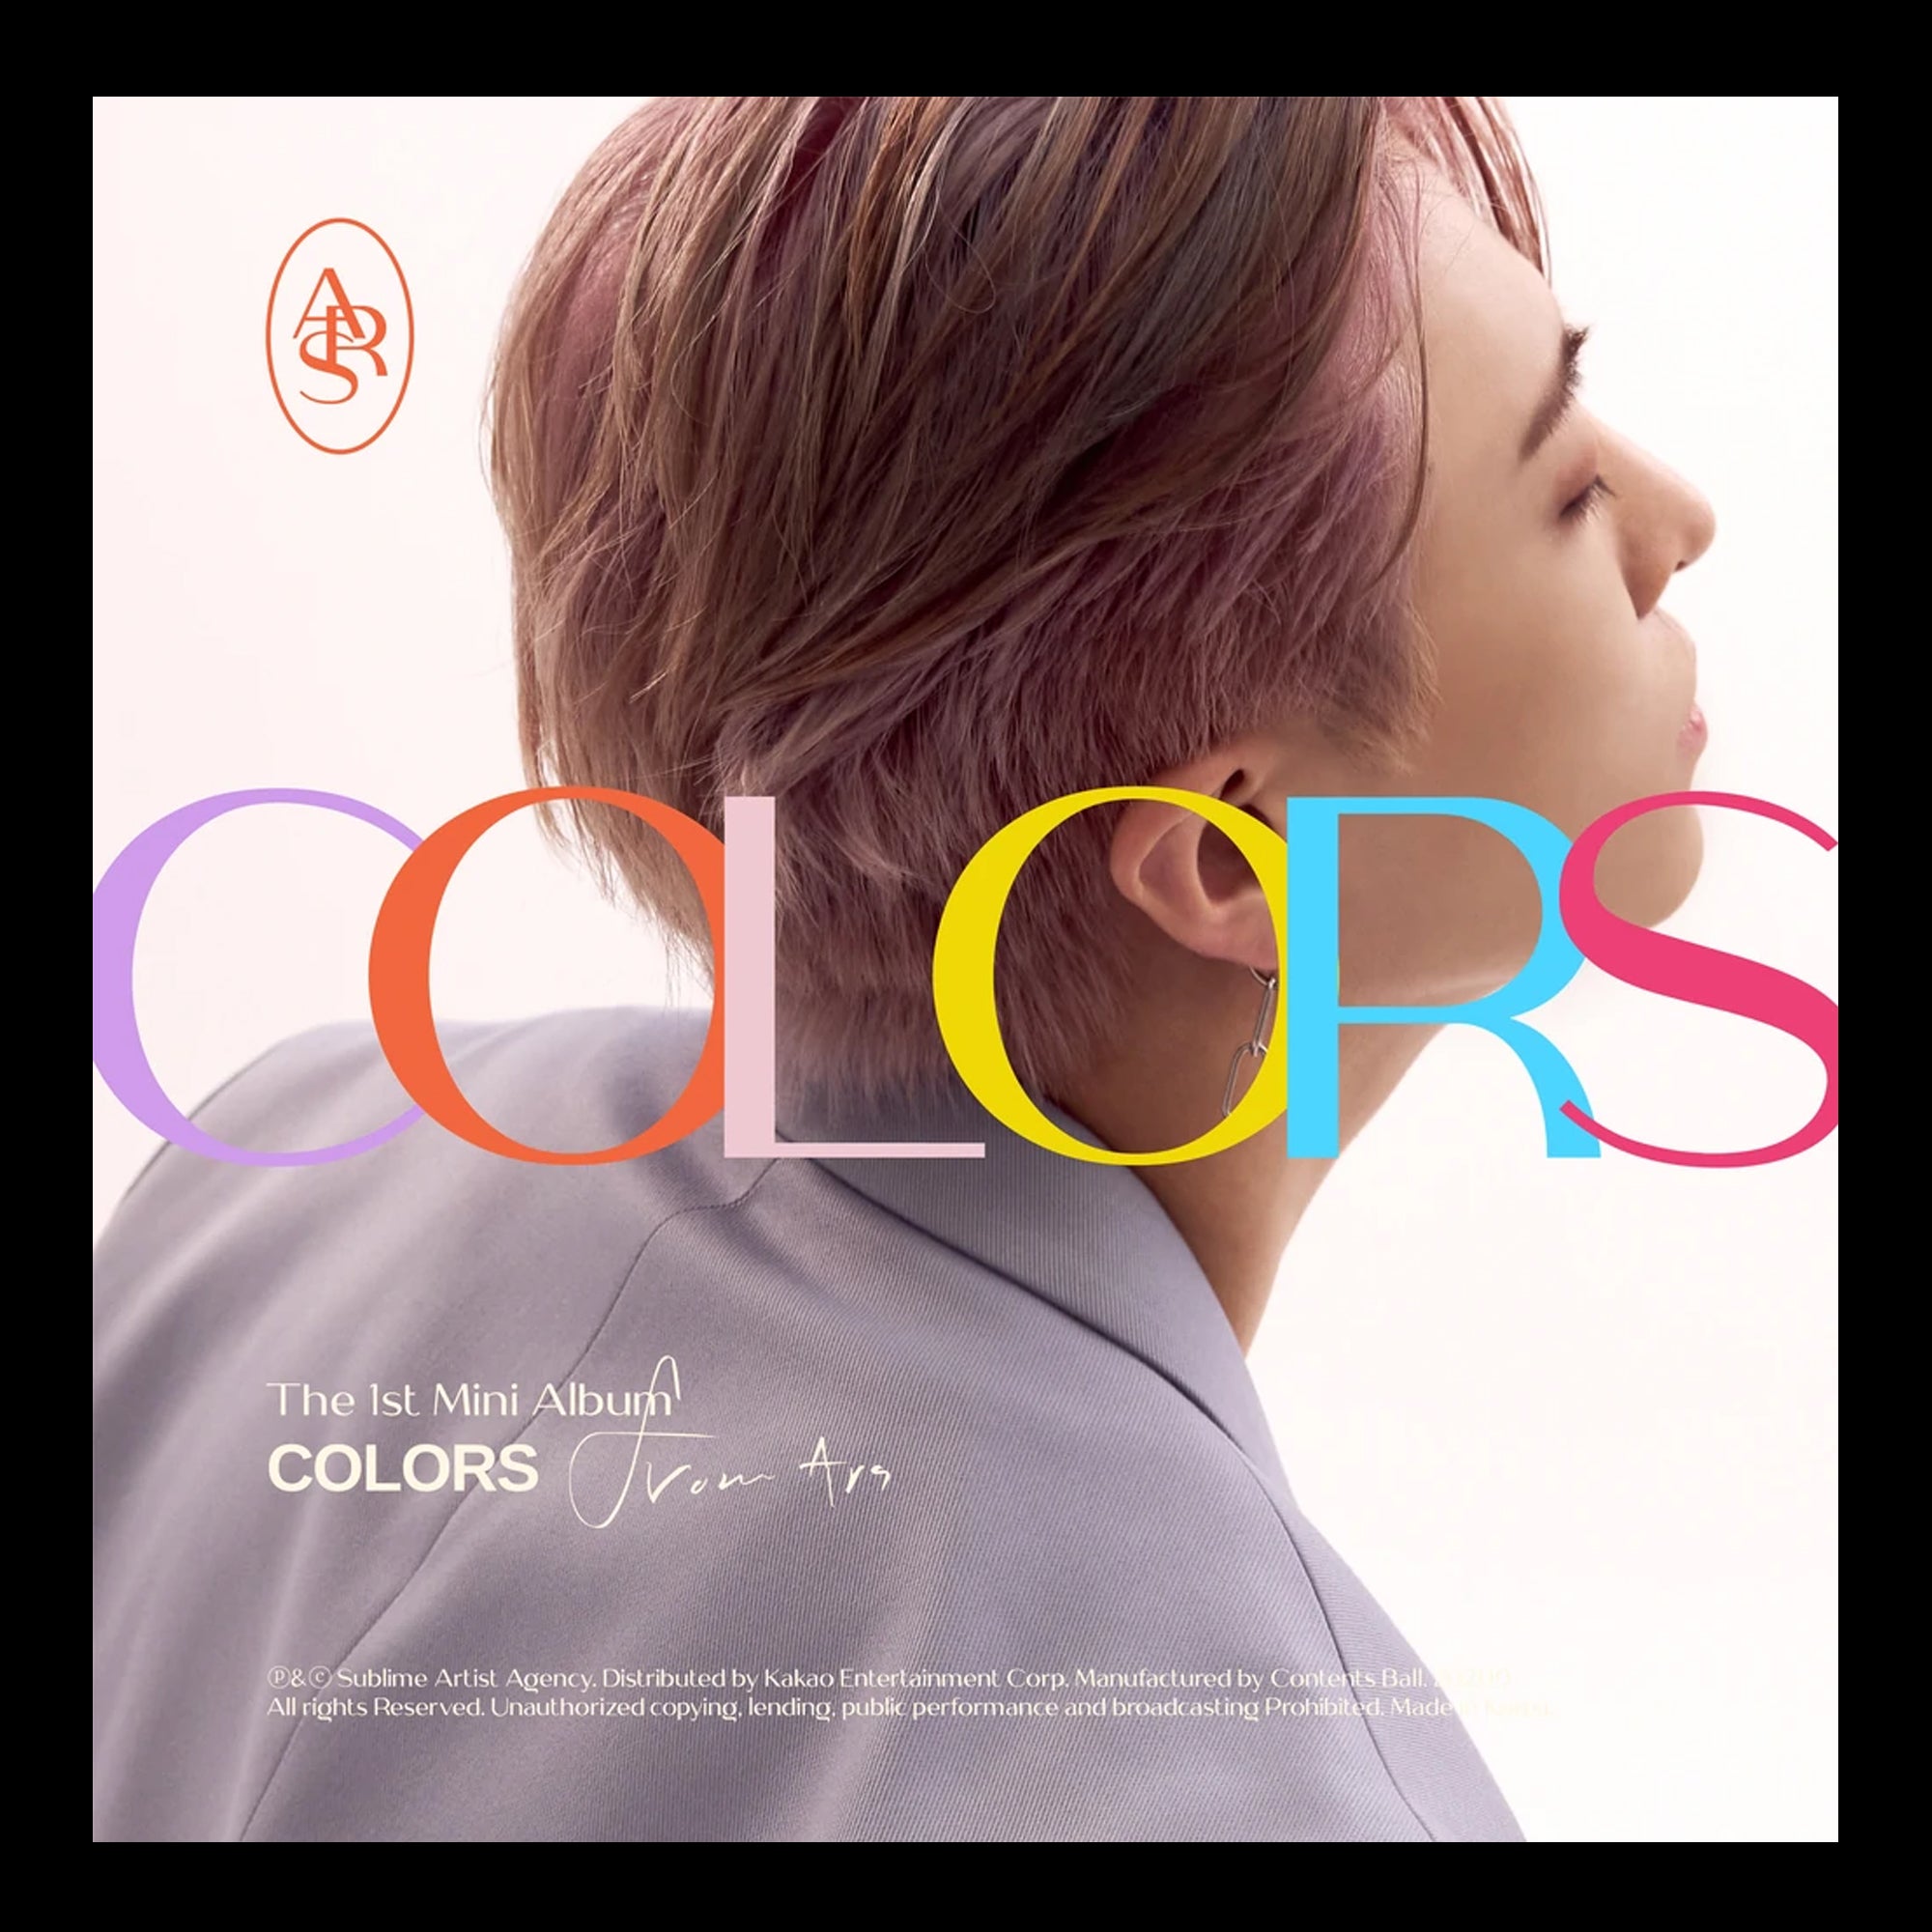 GOT7 YOUNGJAE - COLORS from Ars